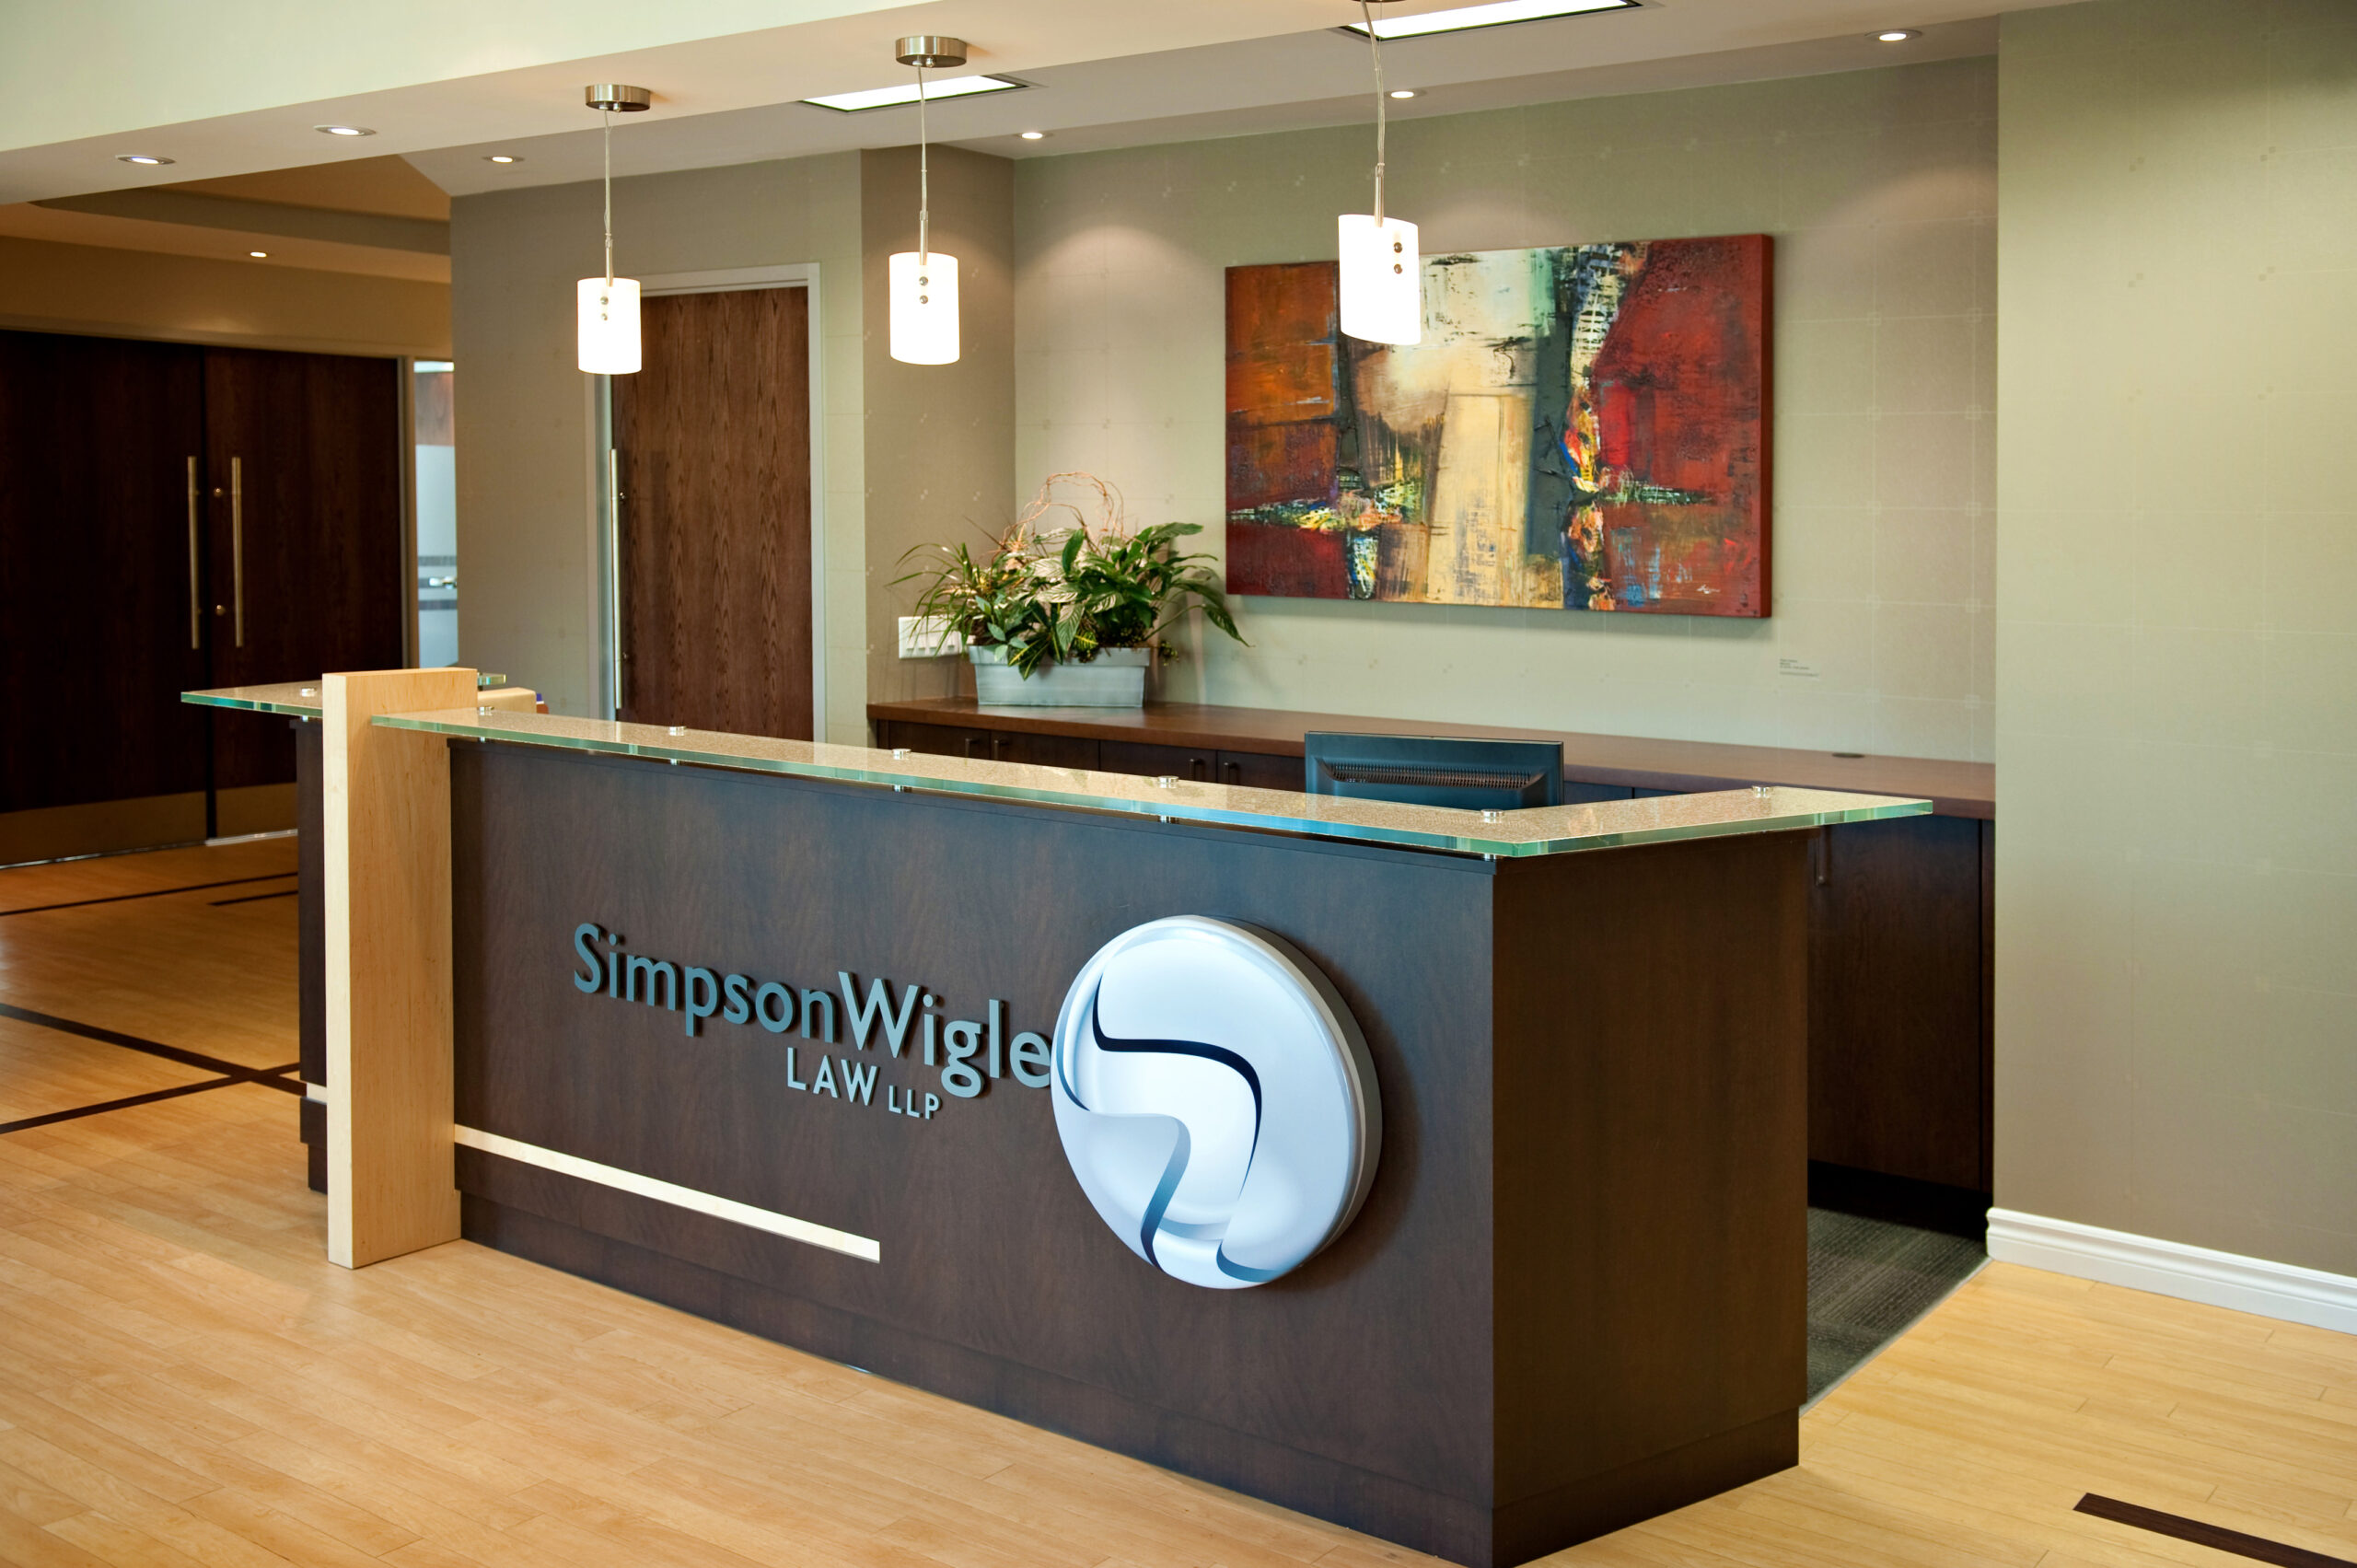 Our law firm, located in Hamilton, Ontario, boasts a modern reception area elegantly complemented by a contemporary art piece adorning the wall.